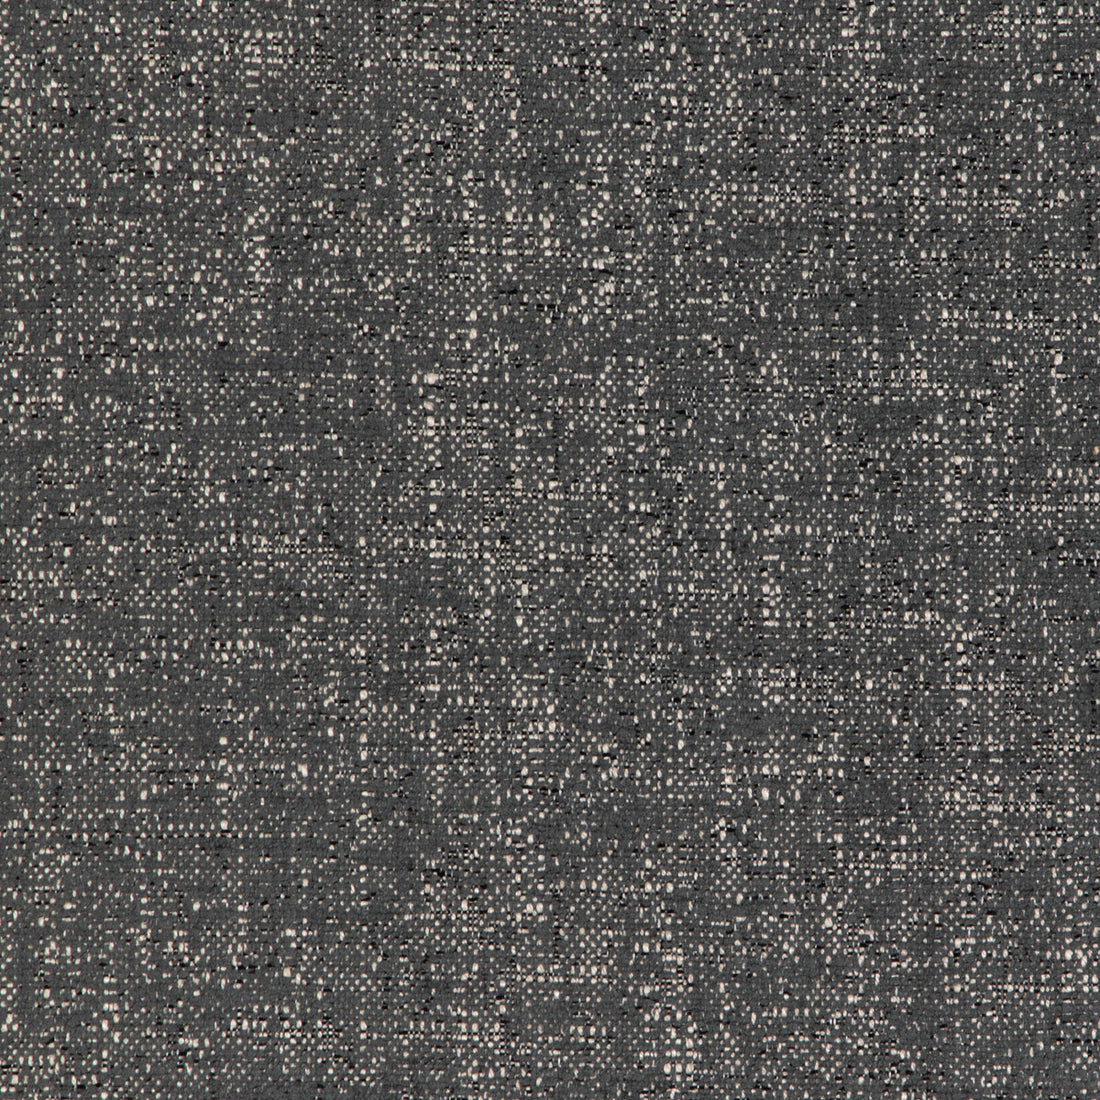 Kravet Design fabric in 36951-2121 color - pattern 36951.2121.0 - by Kravet Design in the Sustainable Textures II collection